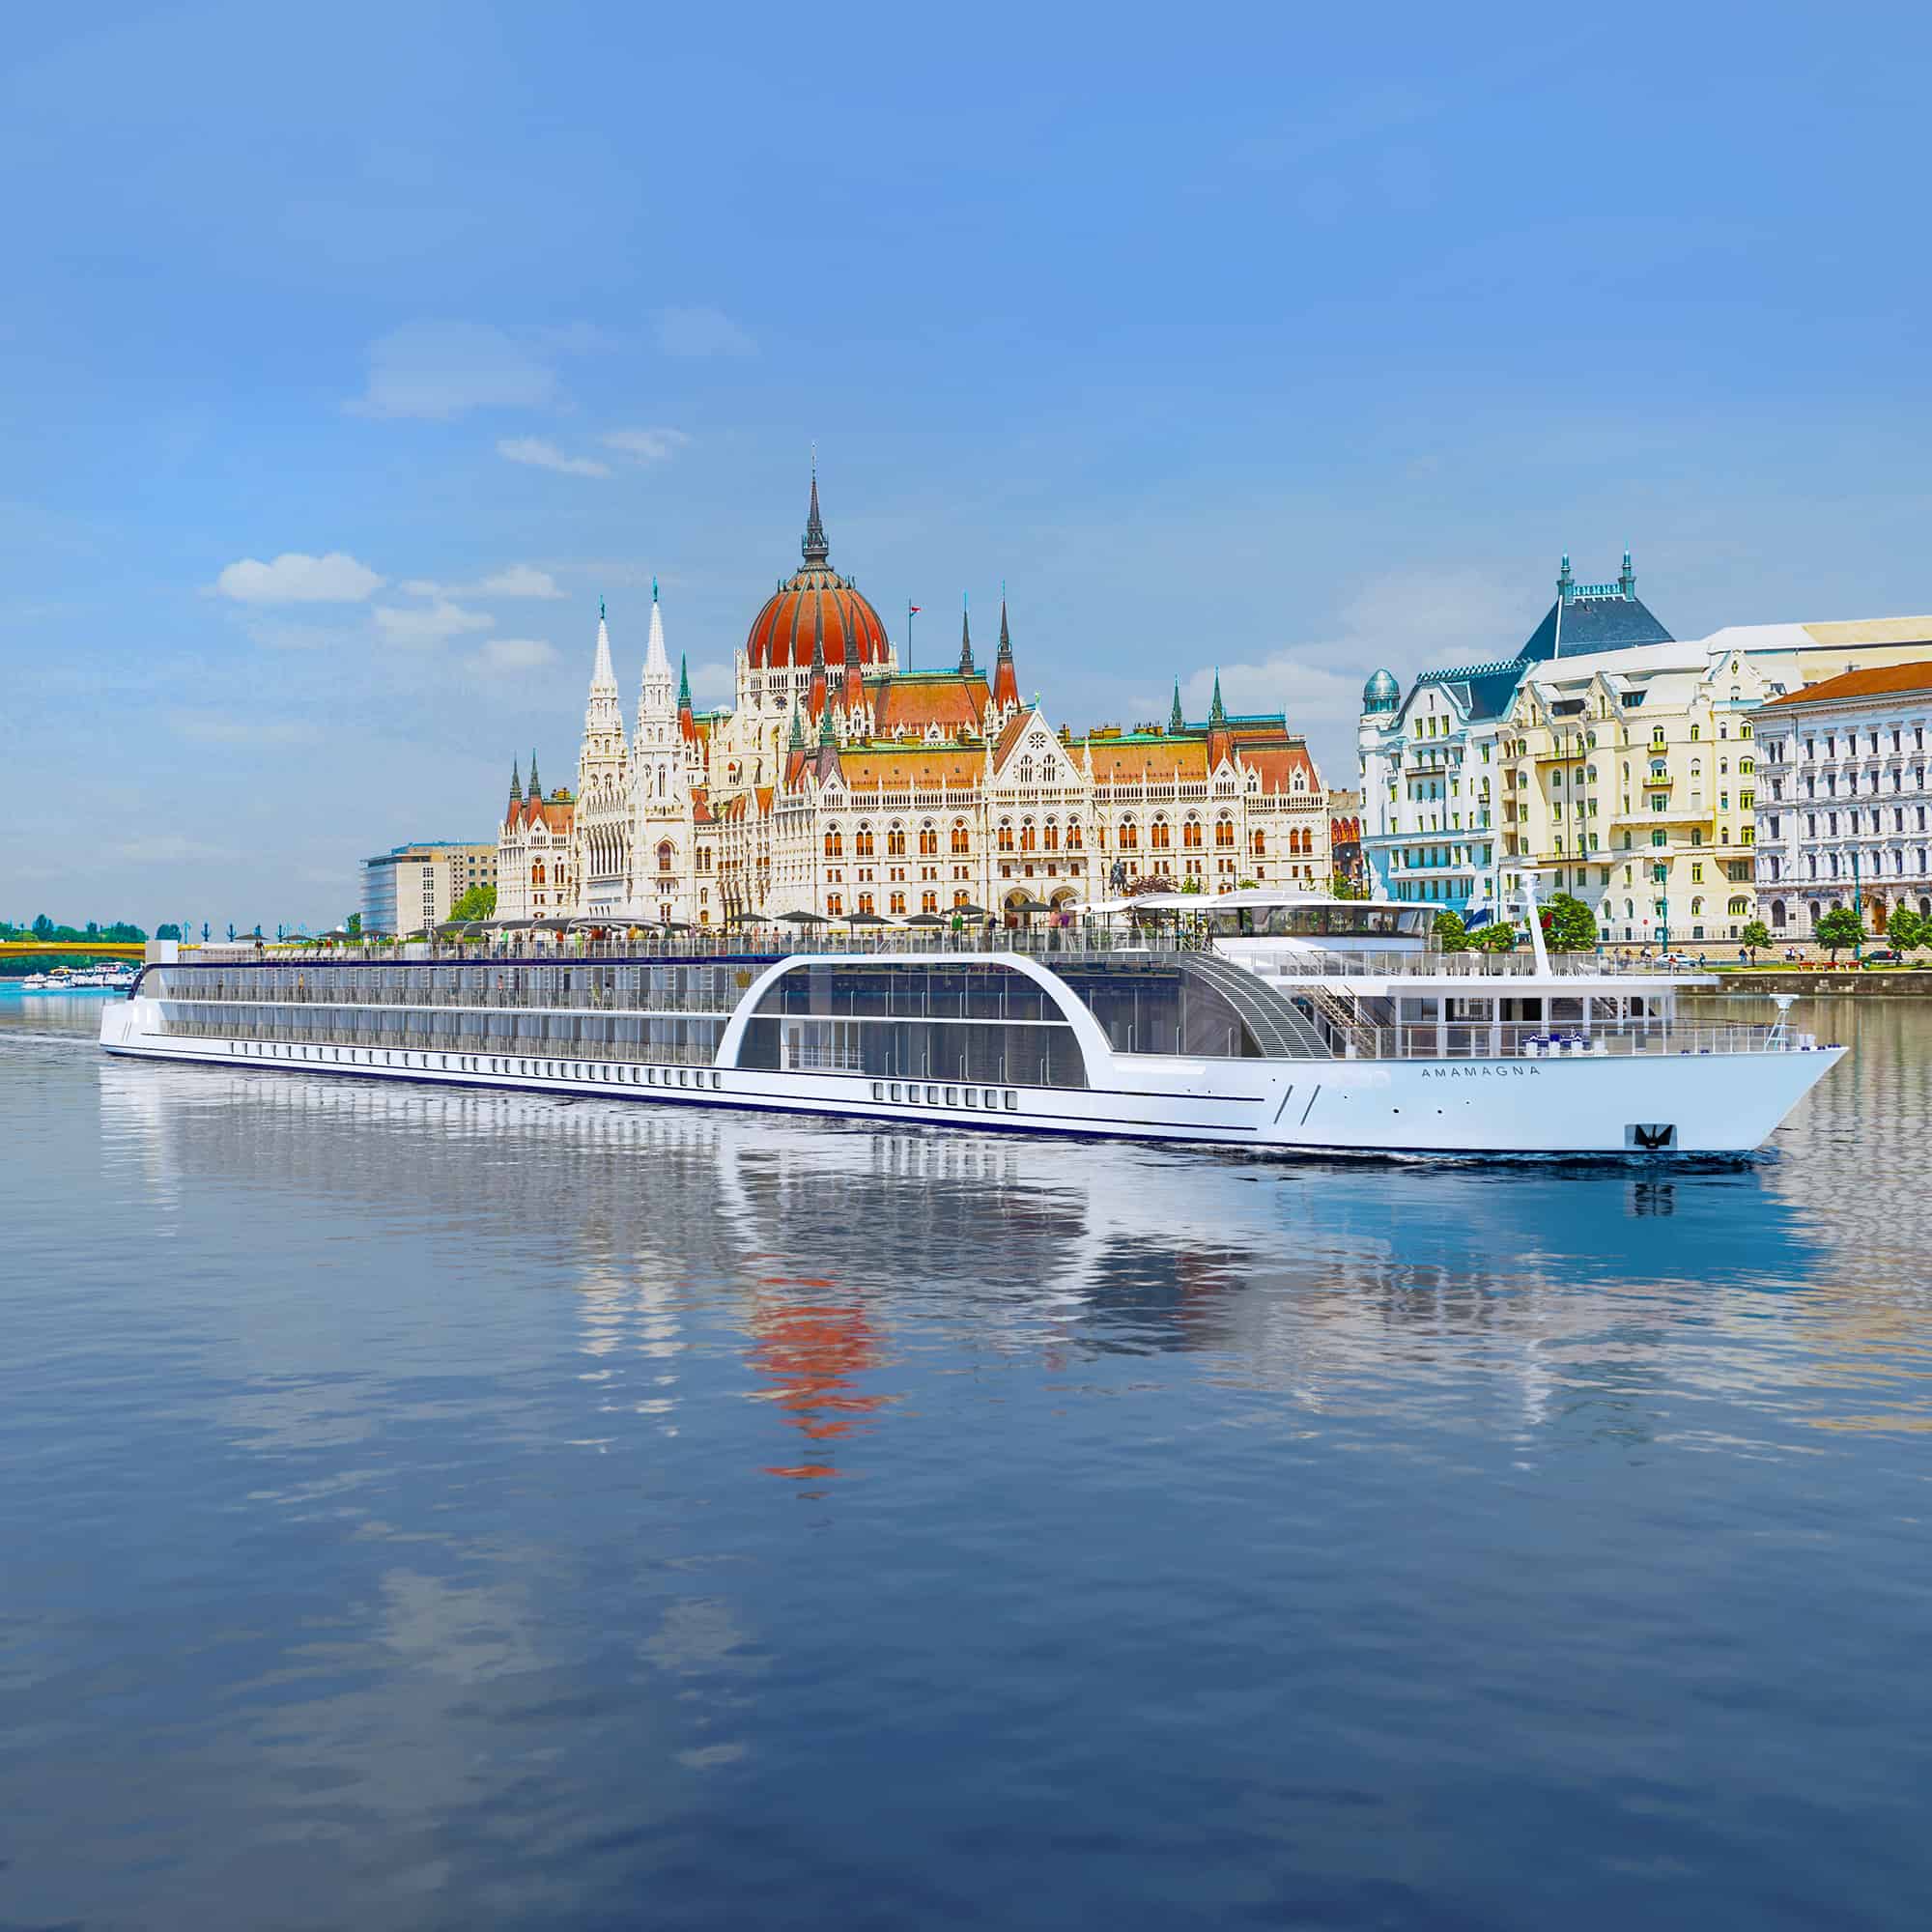 The Best Danube River Cruise with AmaWaterways